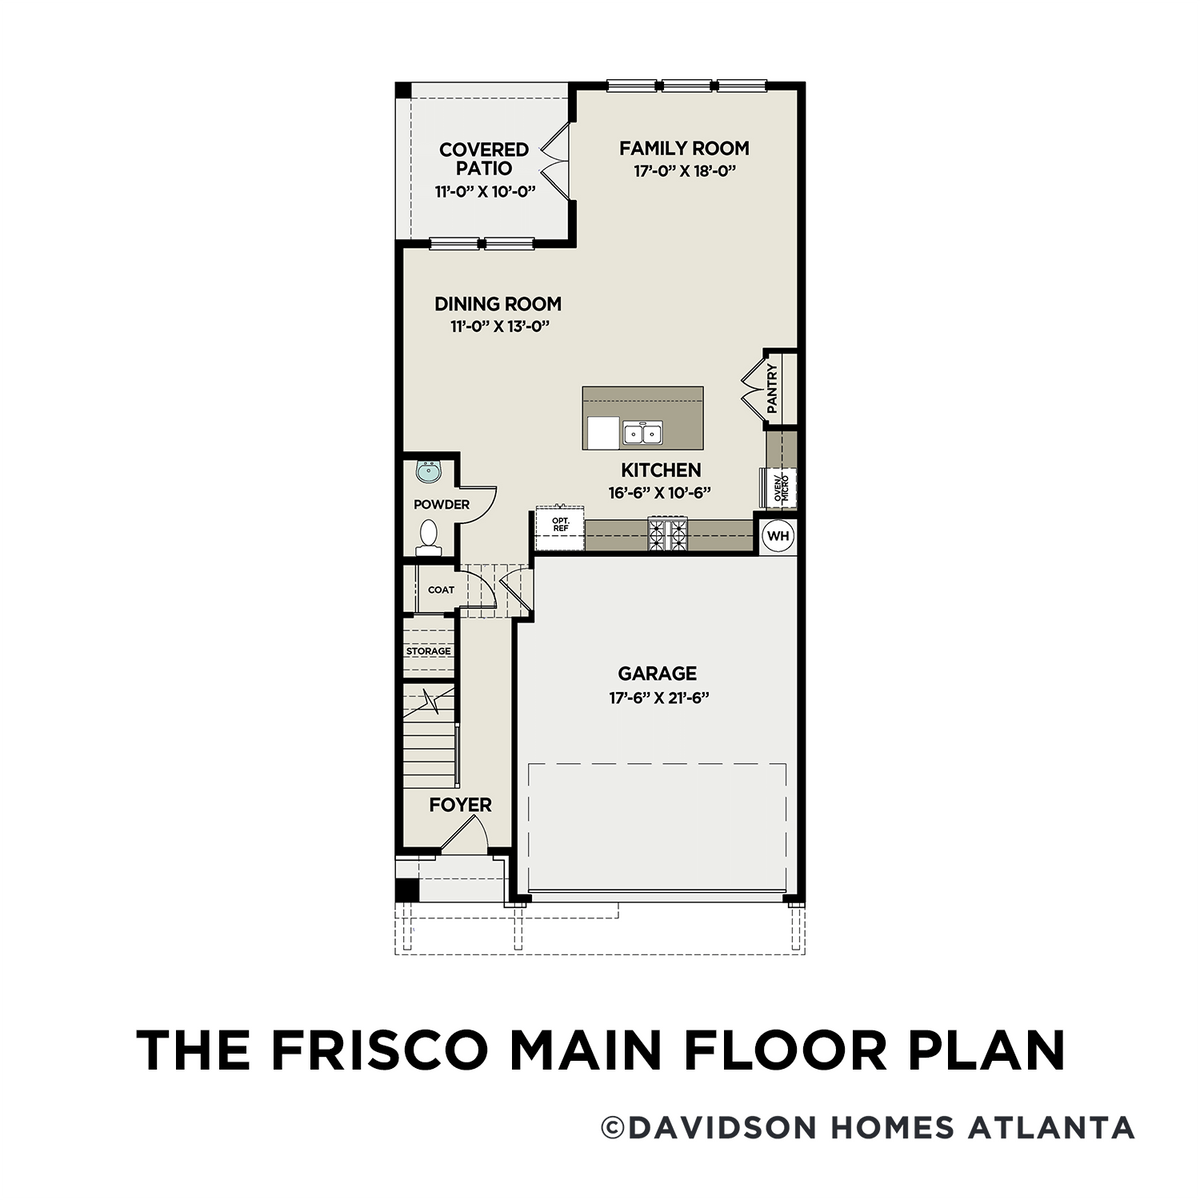 1 - The Frisco C floor plan layout for 691 Stickley Oak Way in Davidson Homes' The Village at Towne Lake community.